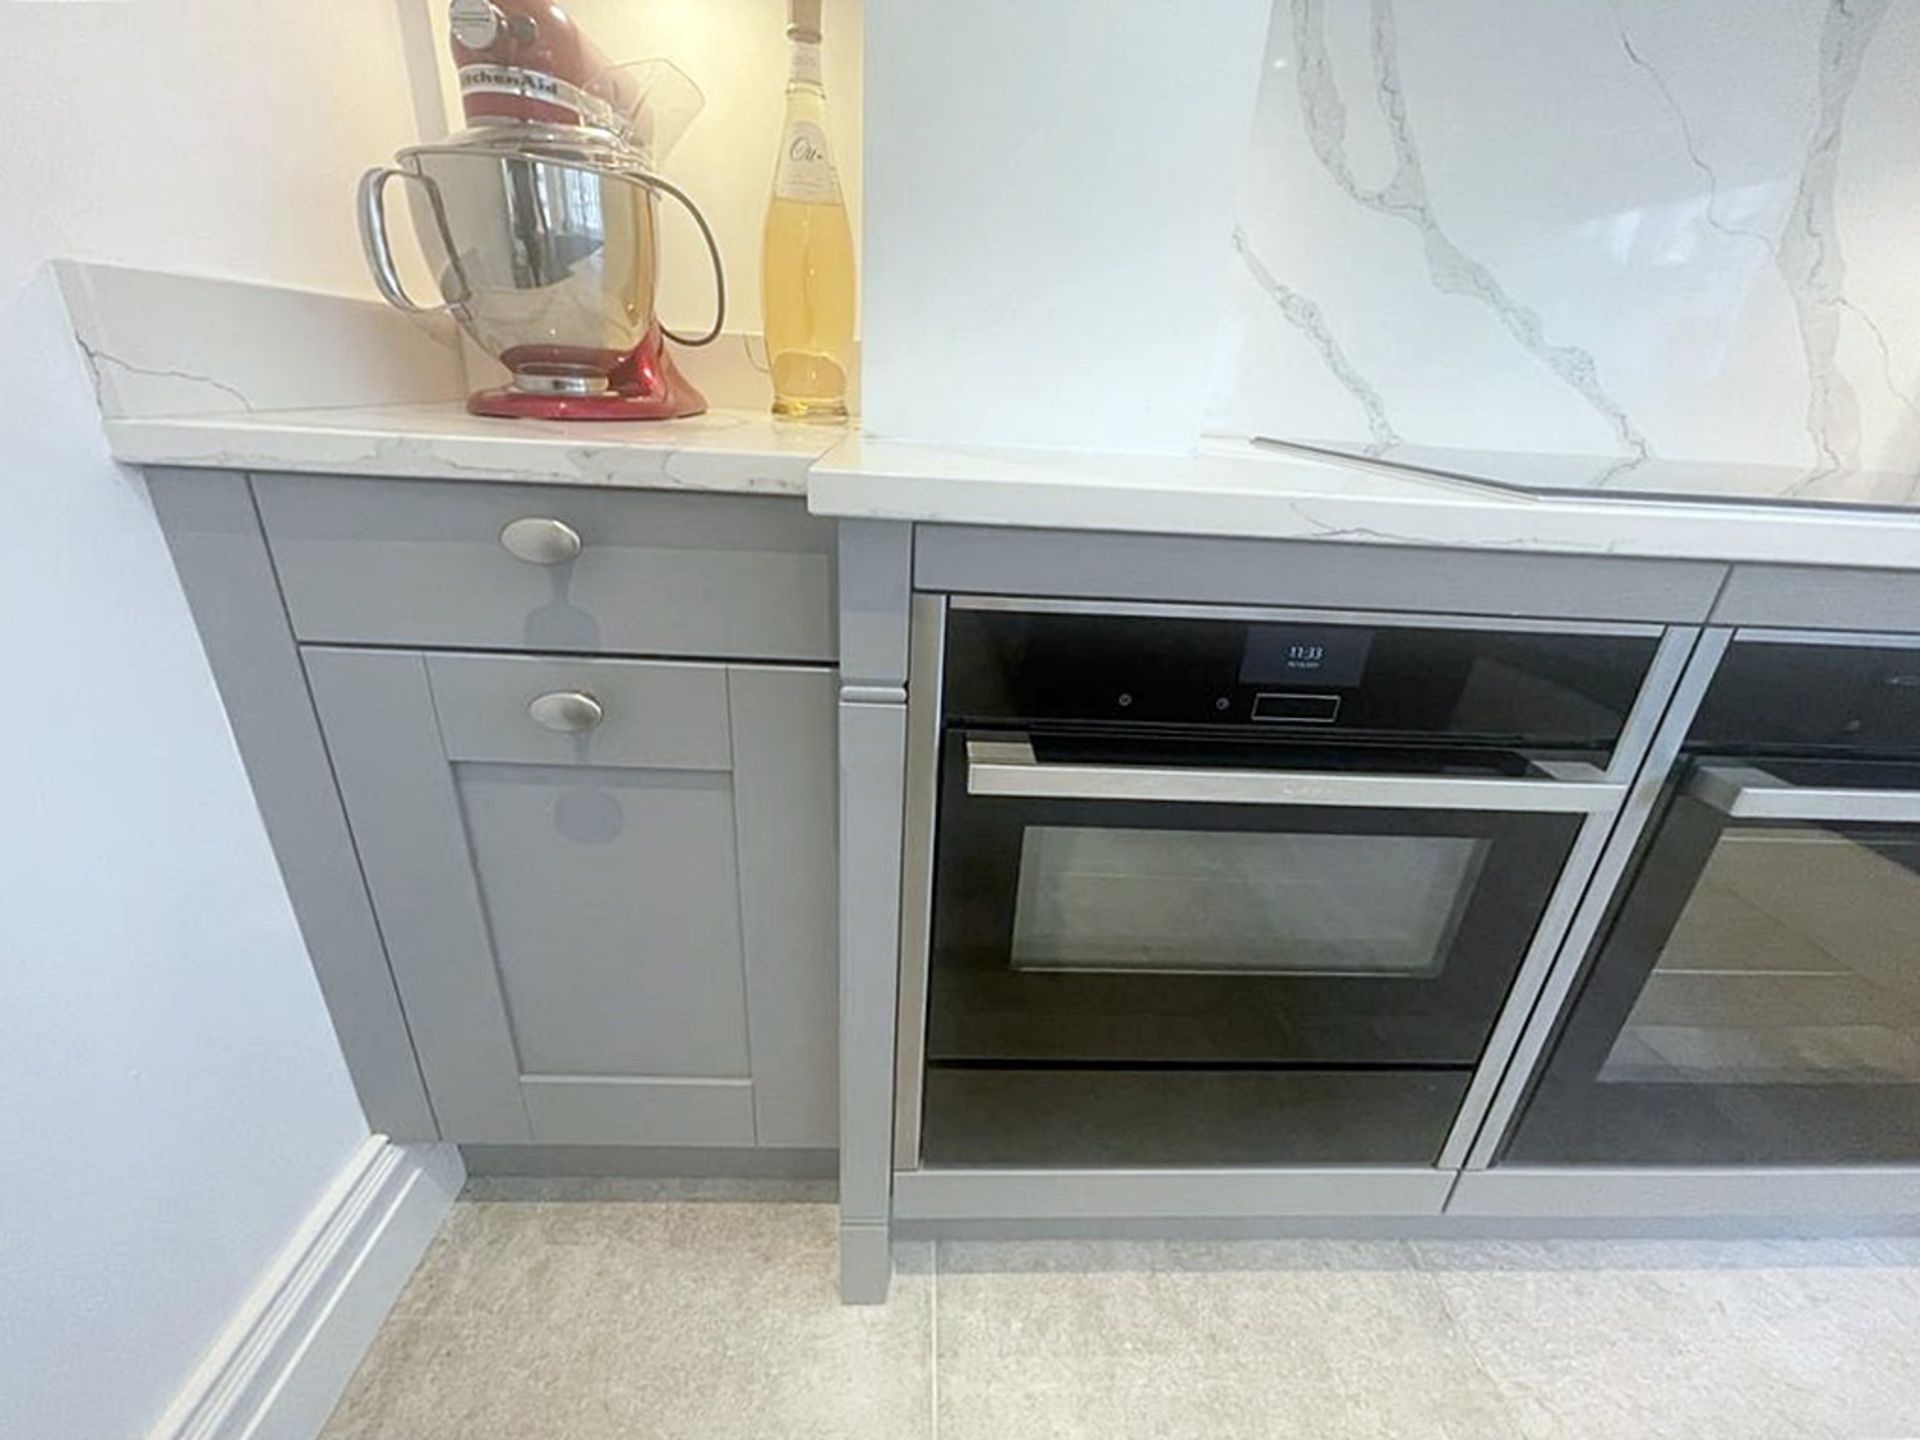 1 x SIEMATIC Bespoke Shaker-style Fitted Kitchen, Utility Room, Appliances & Modern Quartz Surfaces - Image 76 of 99